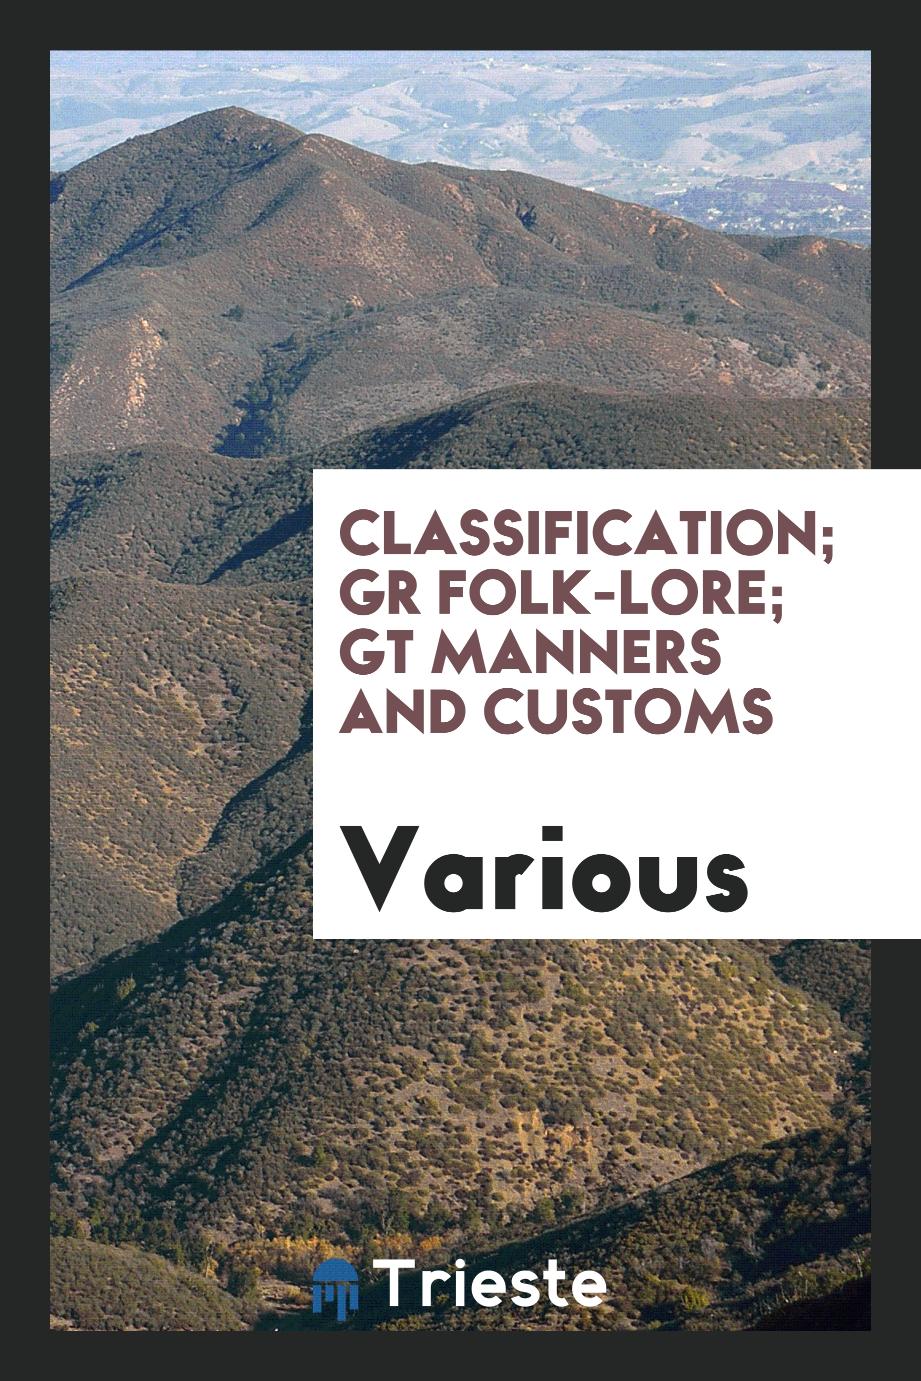 Classification; GR Folk-lore; GT manners and customs